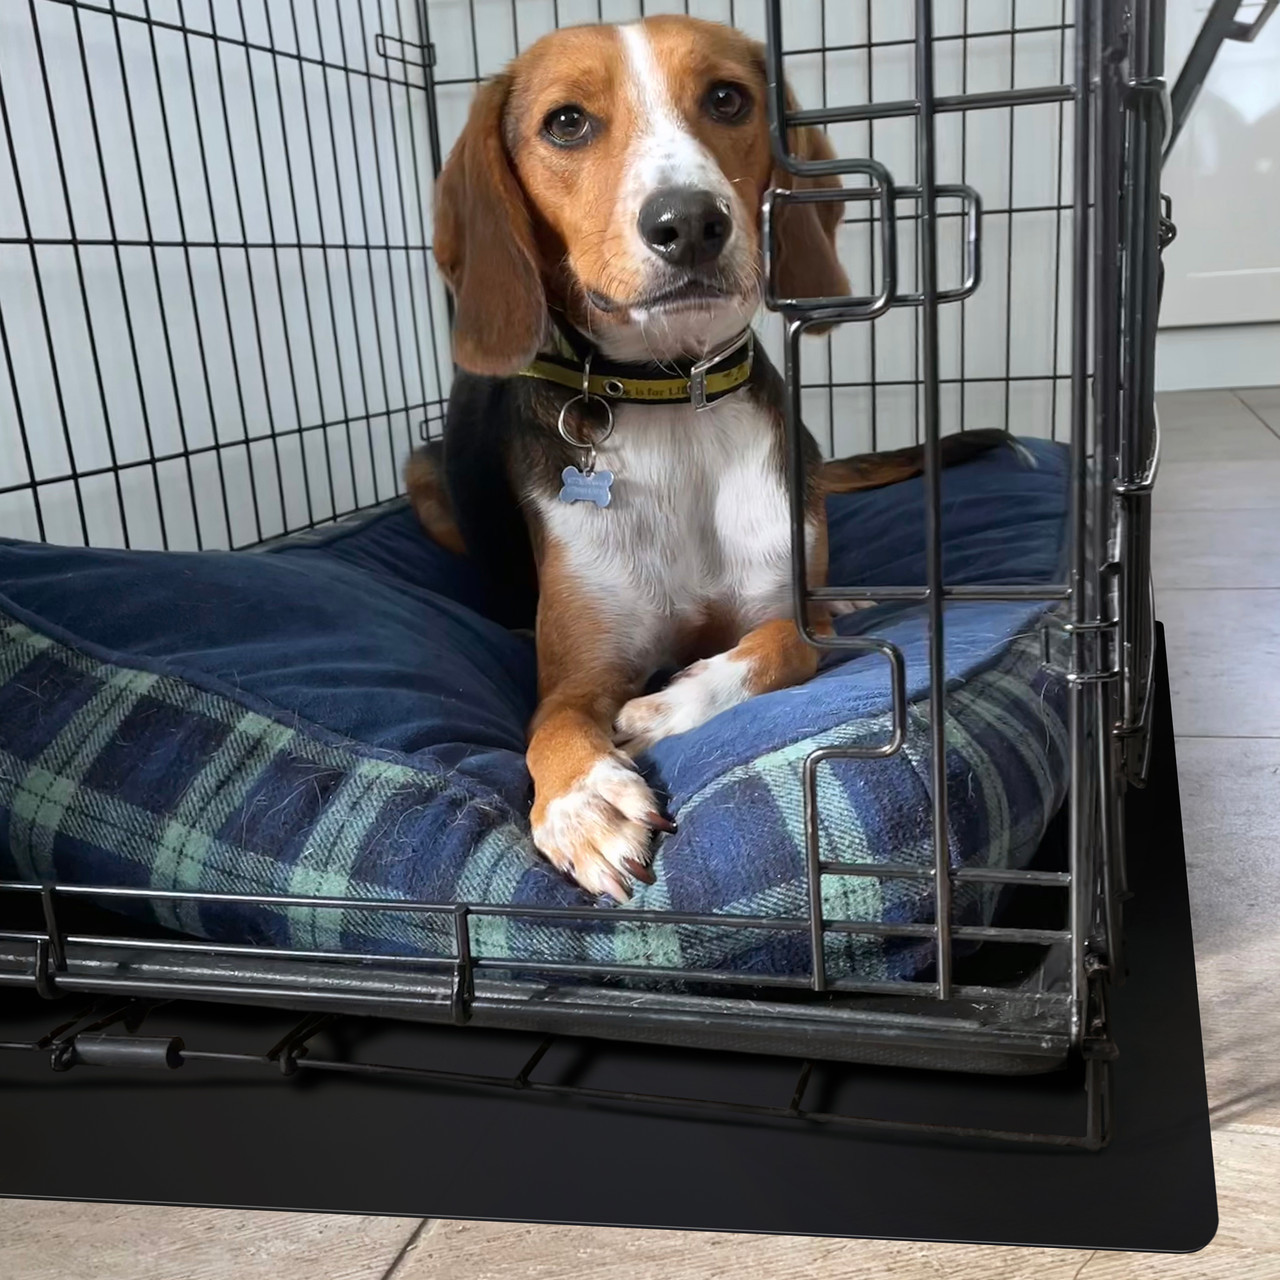 https://cdn11.bigcommerce.com/s-fjwps1jbkv/images/stencil/1280x1280/products/371/3264/p-tex-pet-crate-polypropylene-floor-protection-mat-for-use-on-hard-floors-and-carpets-or-rectangular-dog-crate-mat-or-black-or-3-sizes-available__71678.1688990082.jpg?c=2?imbypass=on